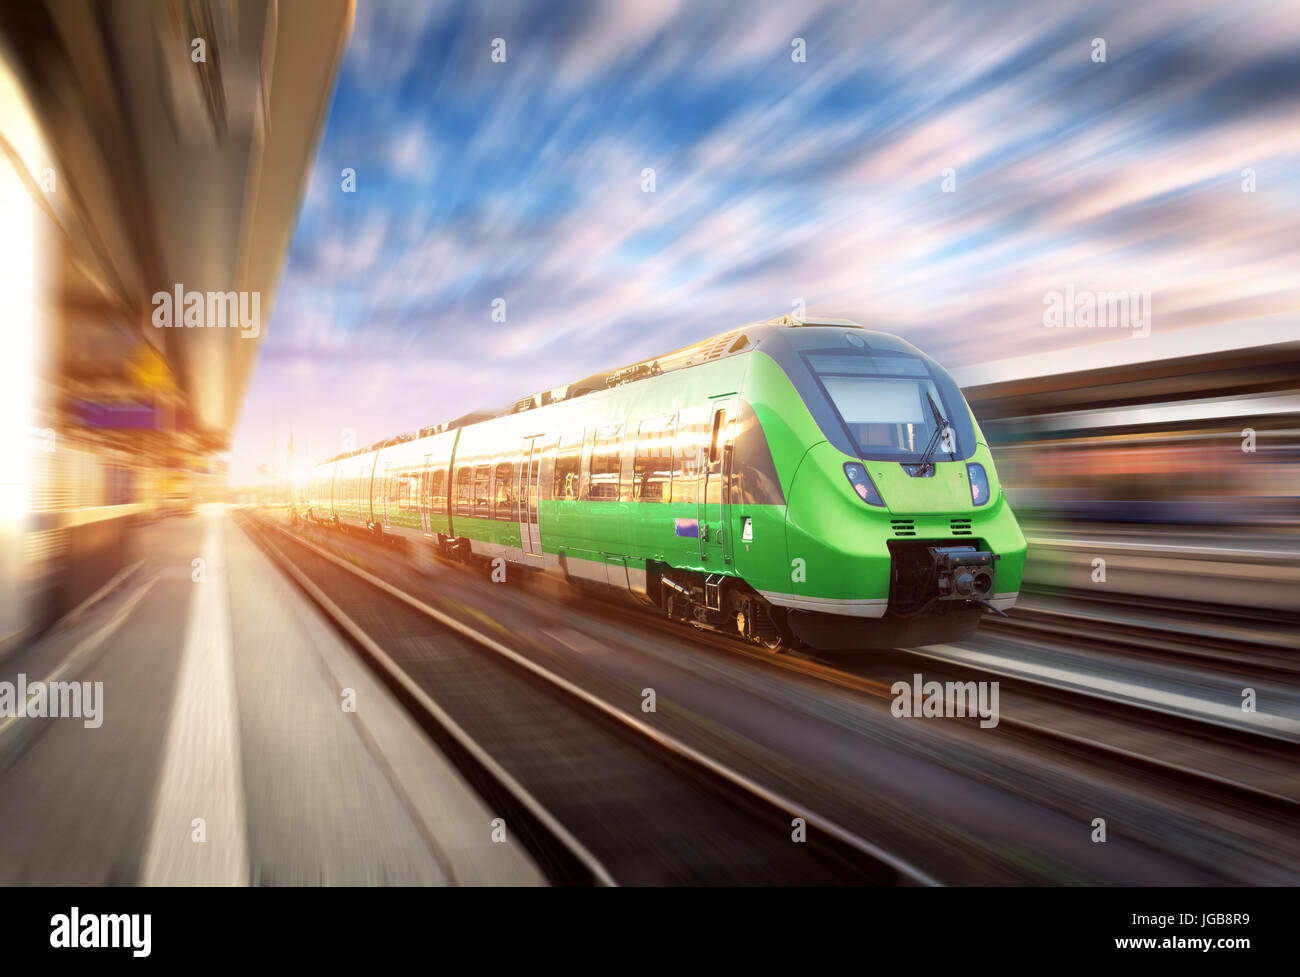 High speed train in motion at the railway station at sunset in Europe. Beautiful green modern train on the railway platform with motion blur effect. I Stock Photo